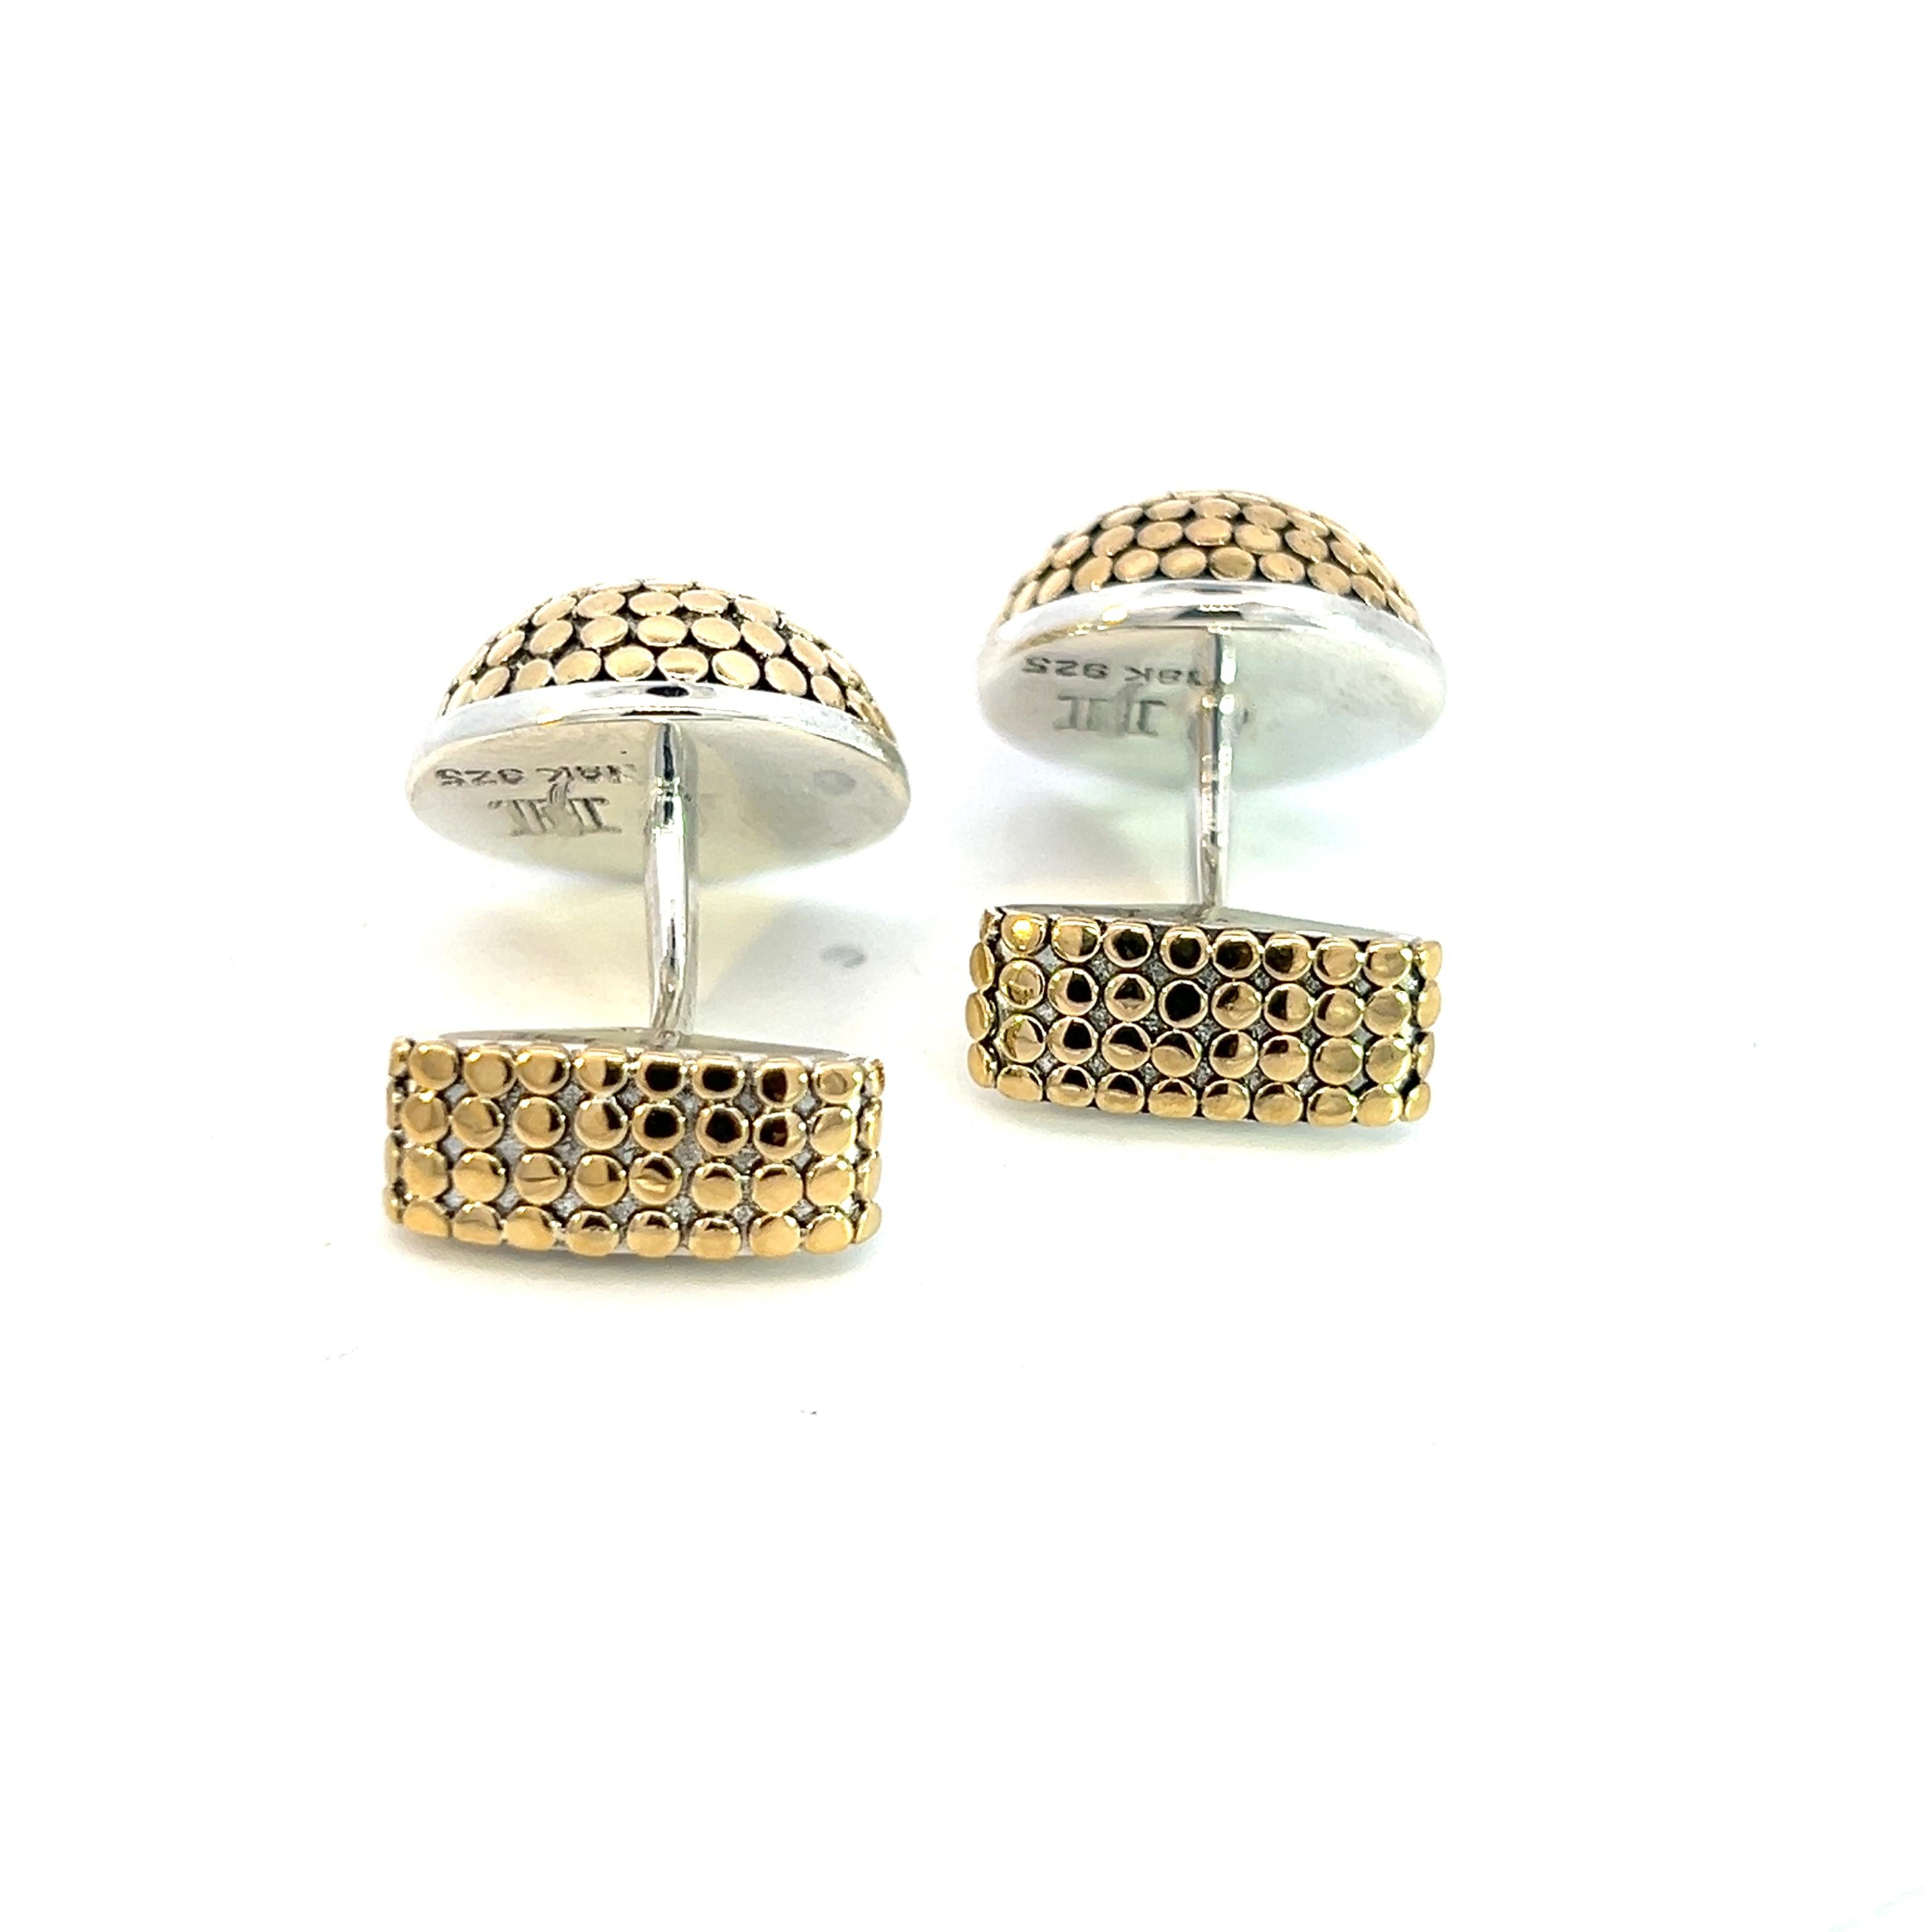 Authentic John Hardy Estate Mens Dots Cufflinks Sterling Silver 18k Y Gold JH71

TRUSTED SELLER SINCE 2002

PLEASE SEE OUR HUNDREDS OF POSITIVE FEEDBACKS FROM OUR CLIENTS!!

FREE SHIPPING!!

DETAILS
Style: Mens Dots Cufflinks
Metal: Sterling Silver